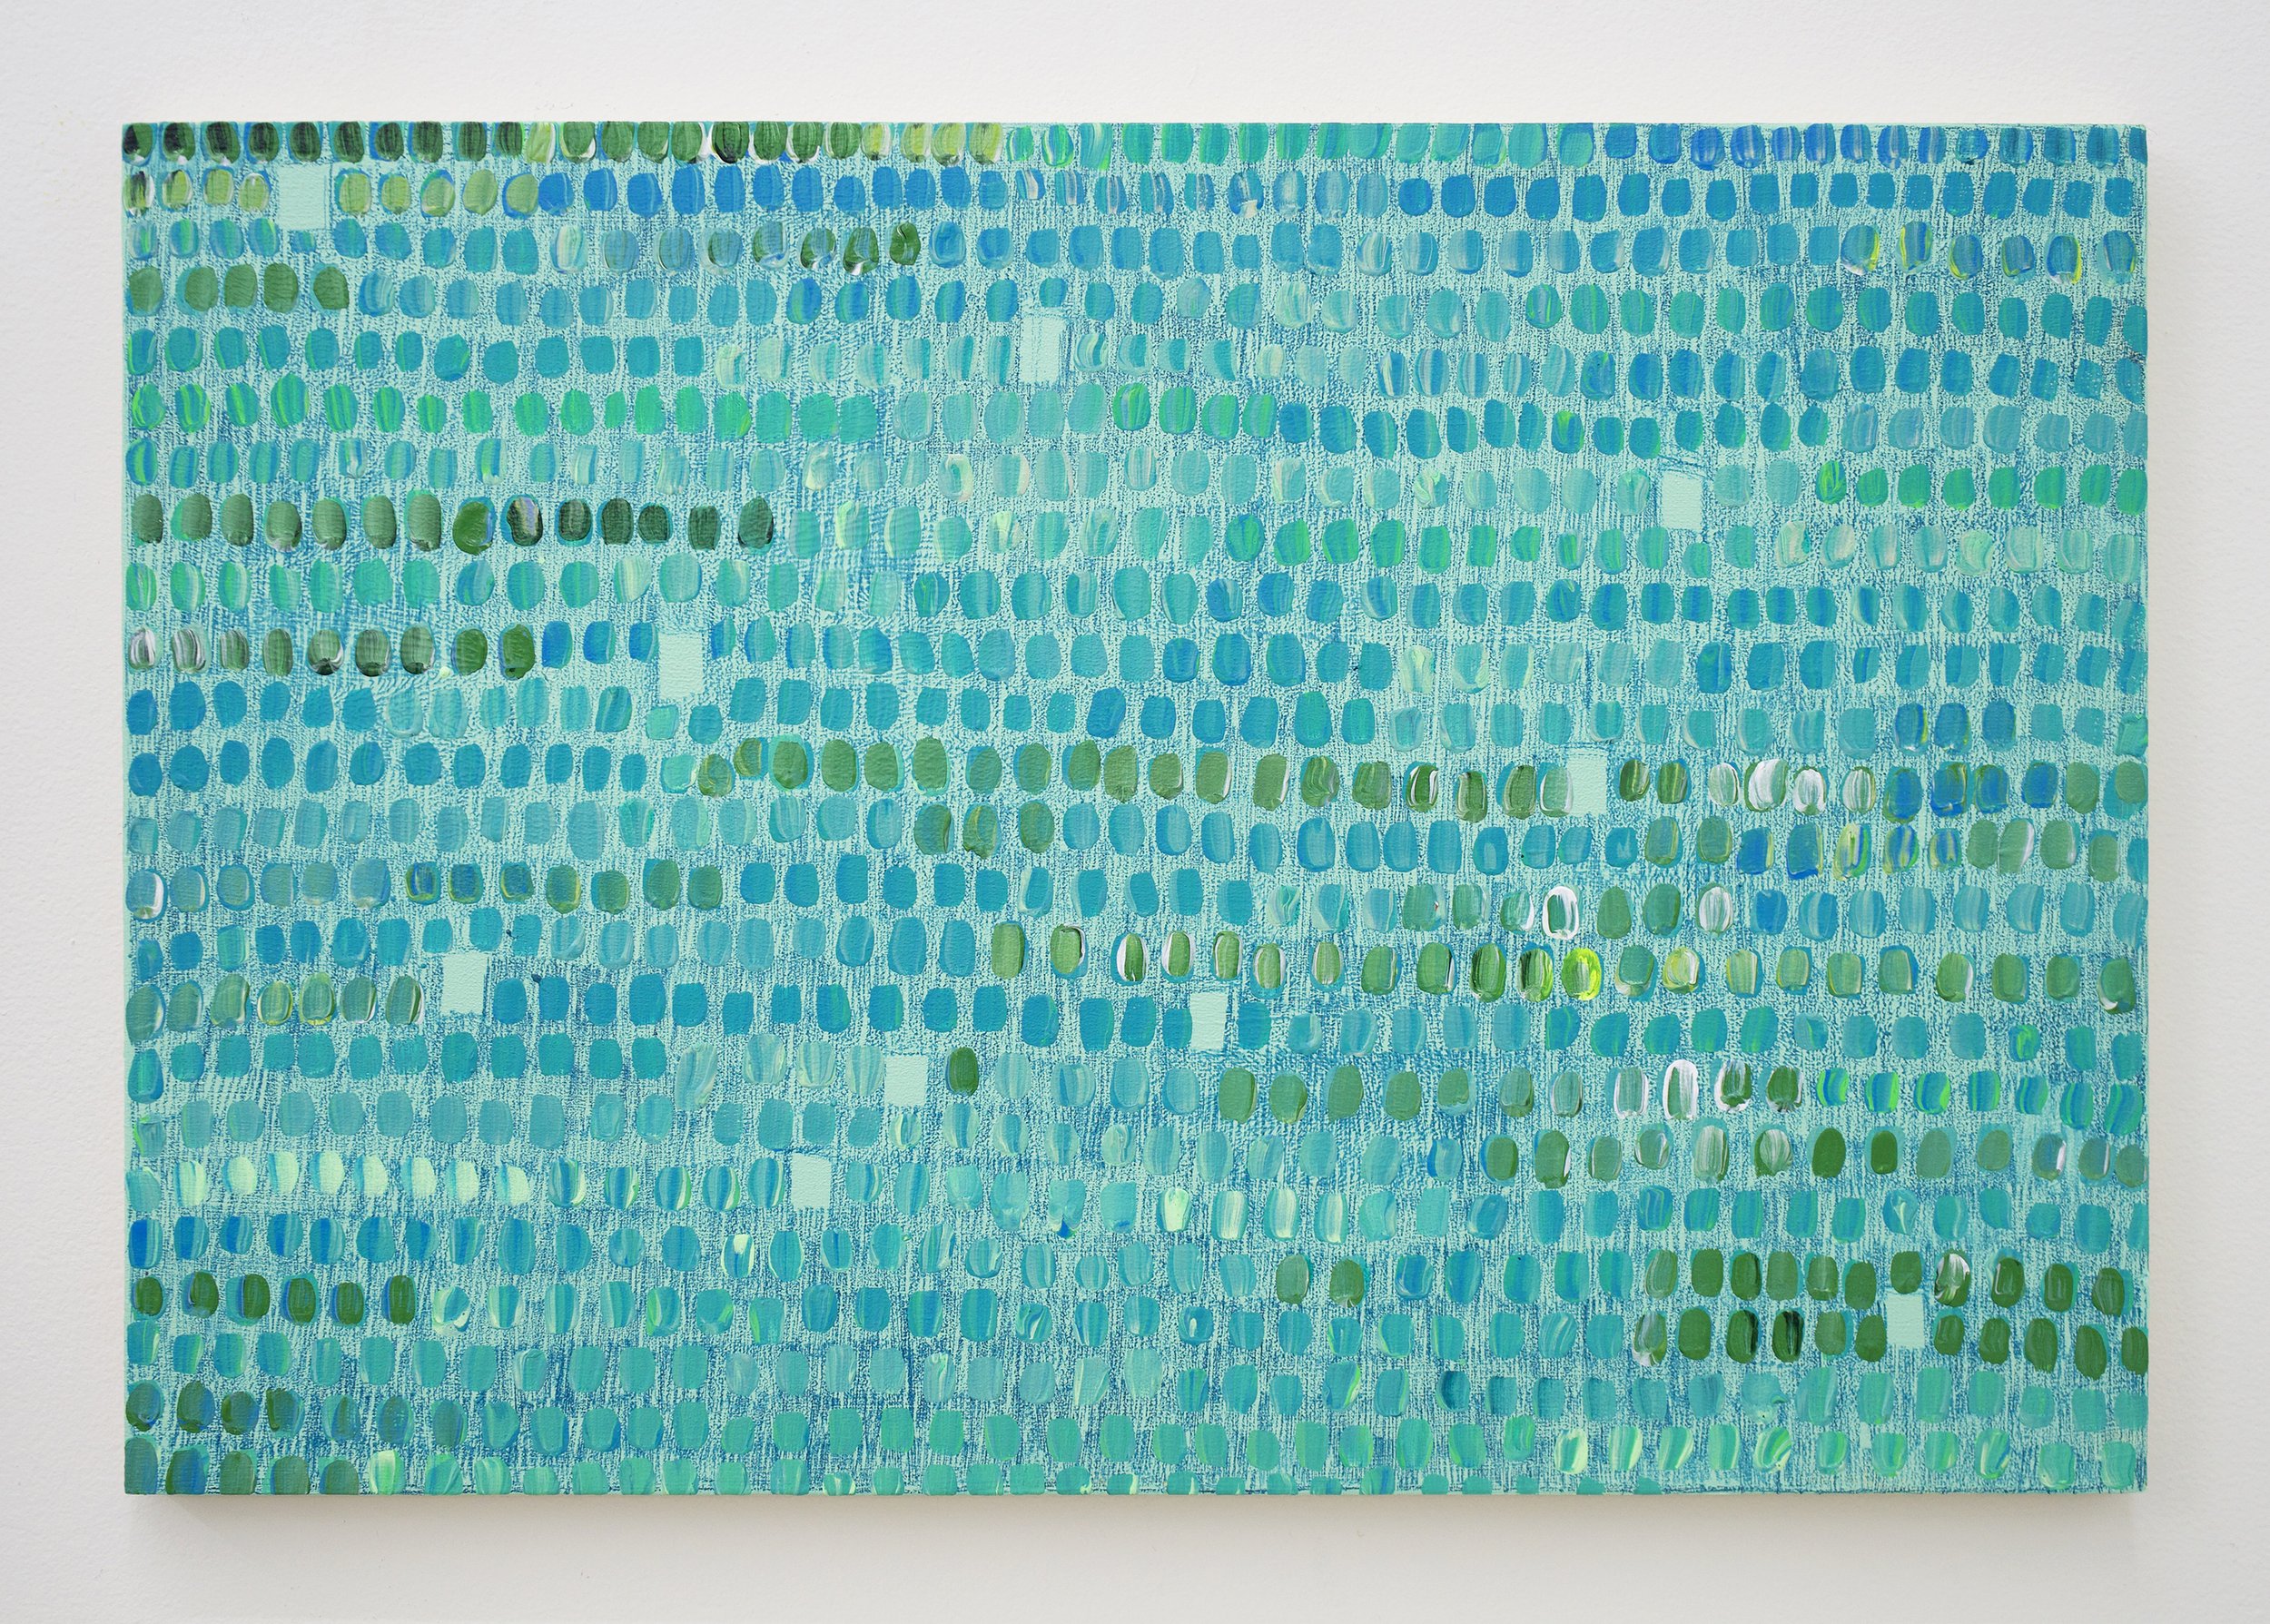   Leah Rosenberg   Marking Time (Teal Blue Mint Green/Thursday/10 breaks) , 2022 acrylic and colored pencil on panel 13" x 19" (LR004) 